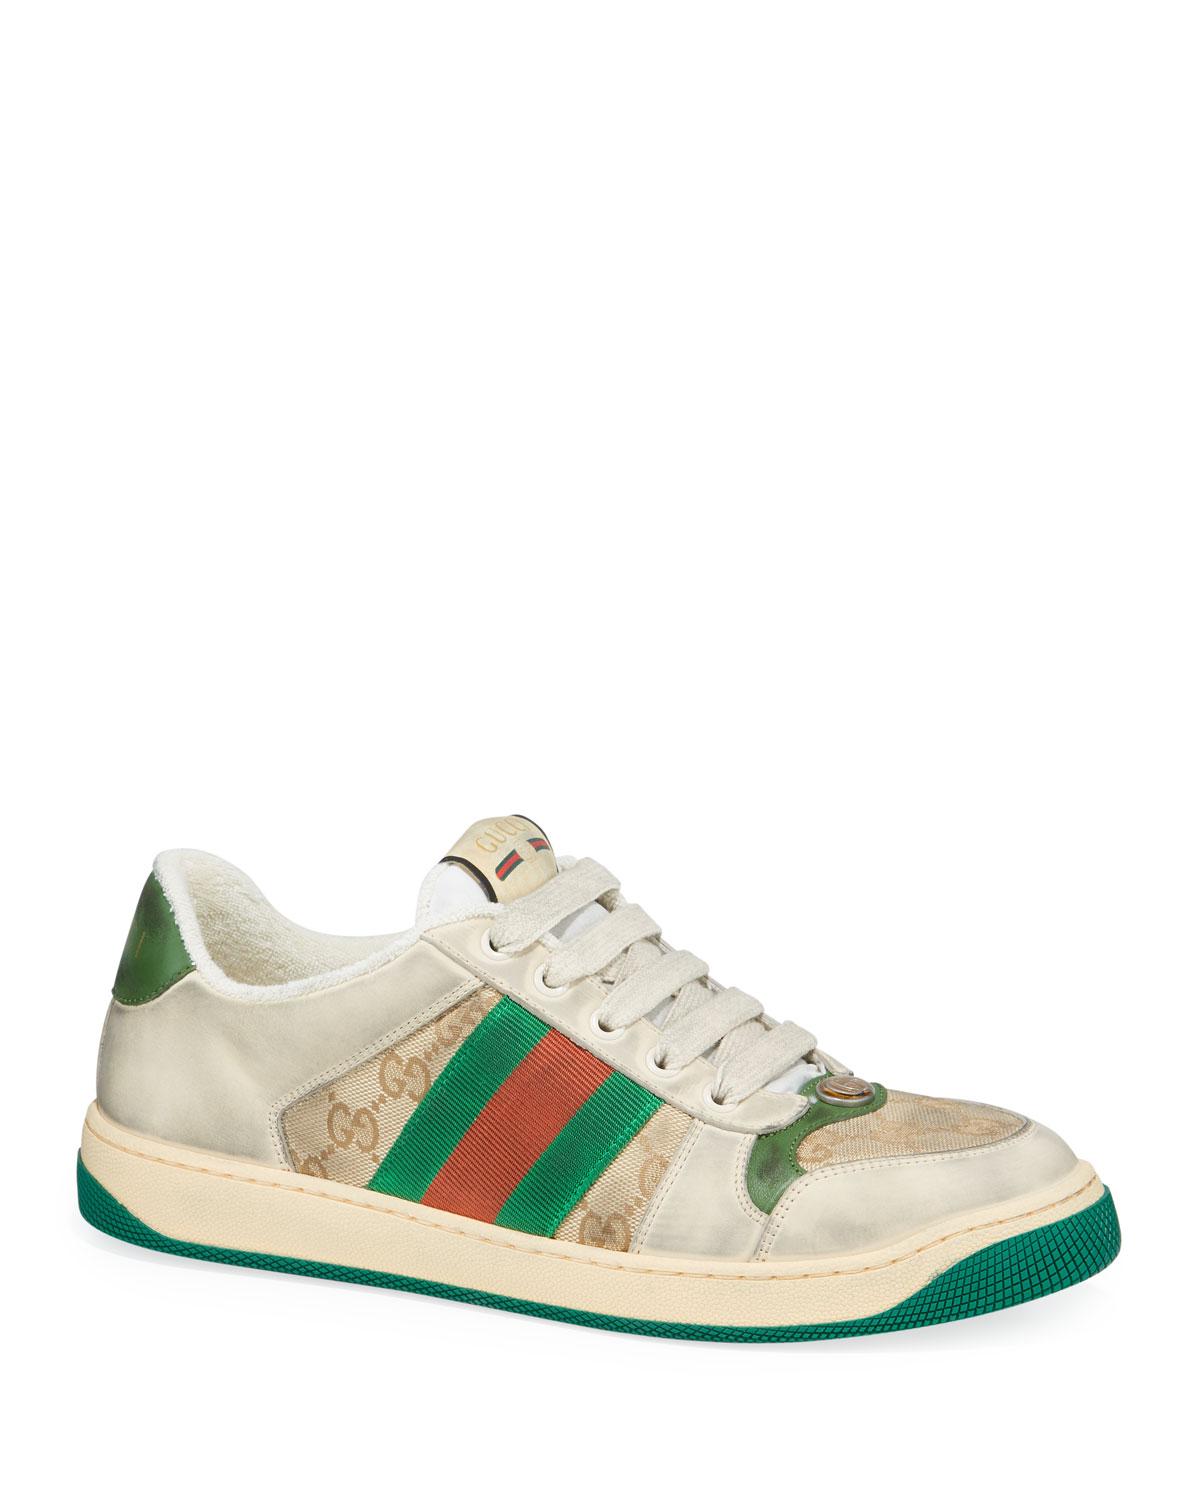 Gucci Canvas Virtus Distressed Leather And Webbing Sneakers in White ...